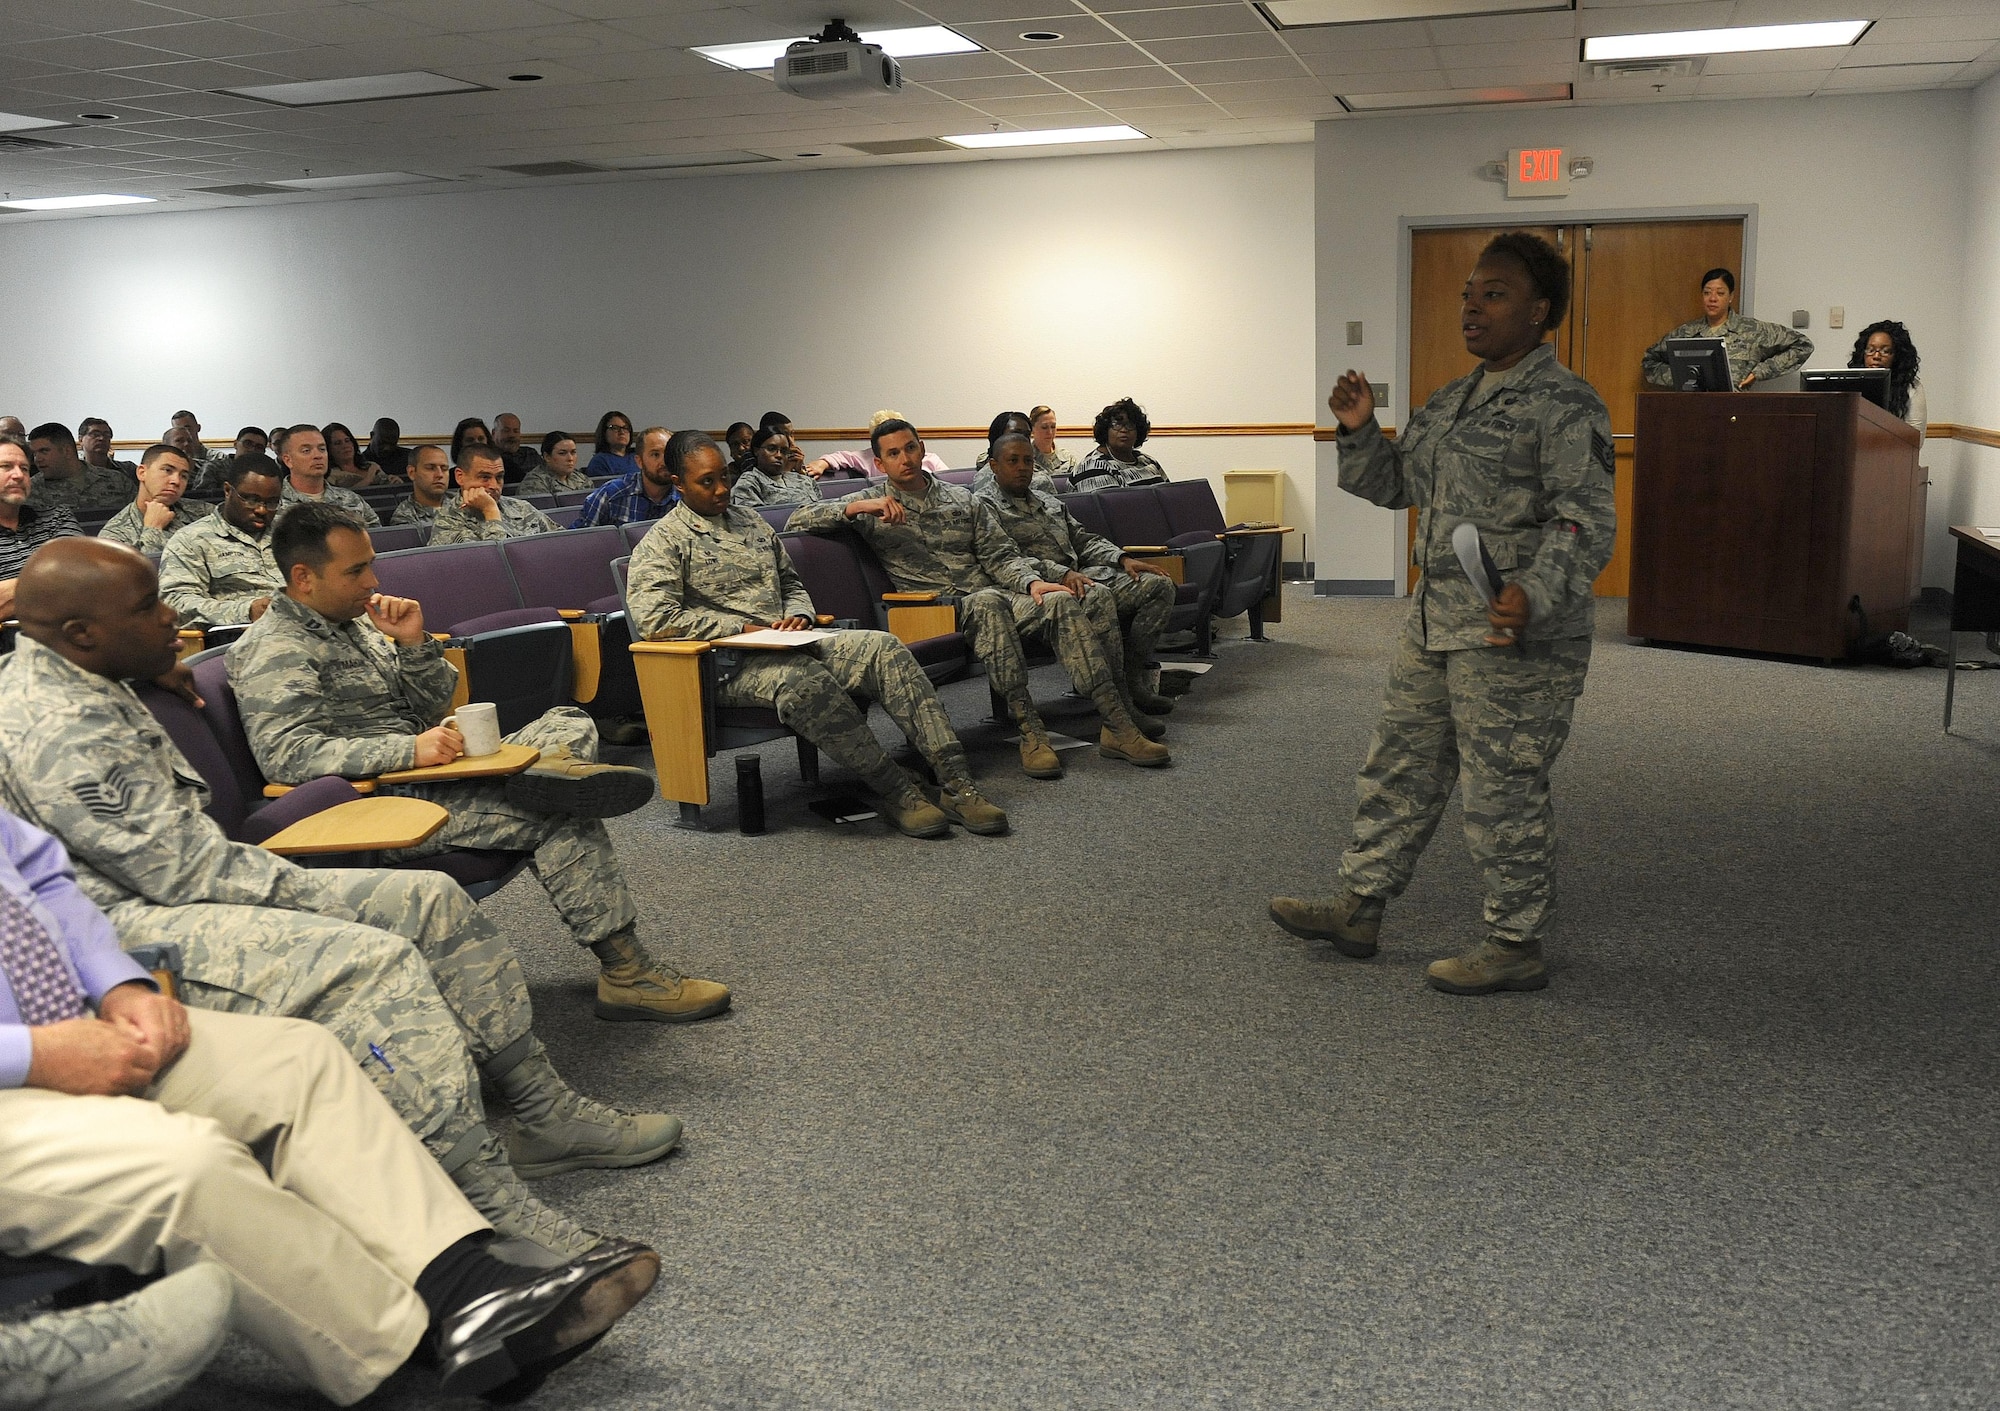 Tech. Sgt. DeMonique Pettaway, 81st Training Wing Equal Opportunity Office NCO in charge, delivers a safety brief to Keesler personnel during an 81st TRW Stand Down Event at the Sablich Center June 29, 2016 on Keesler Air Force Base, Miss. Personnel received a safety brief on driving while under the influence of alcohol and learned ways to prevent DUIs in their units. (U.S. Air Force photo by Kemberly Groue/Released)